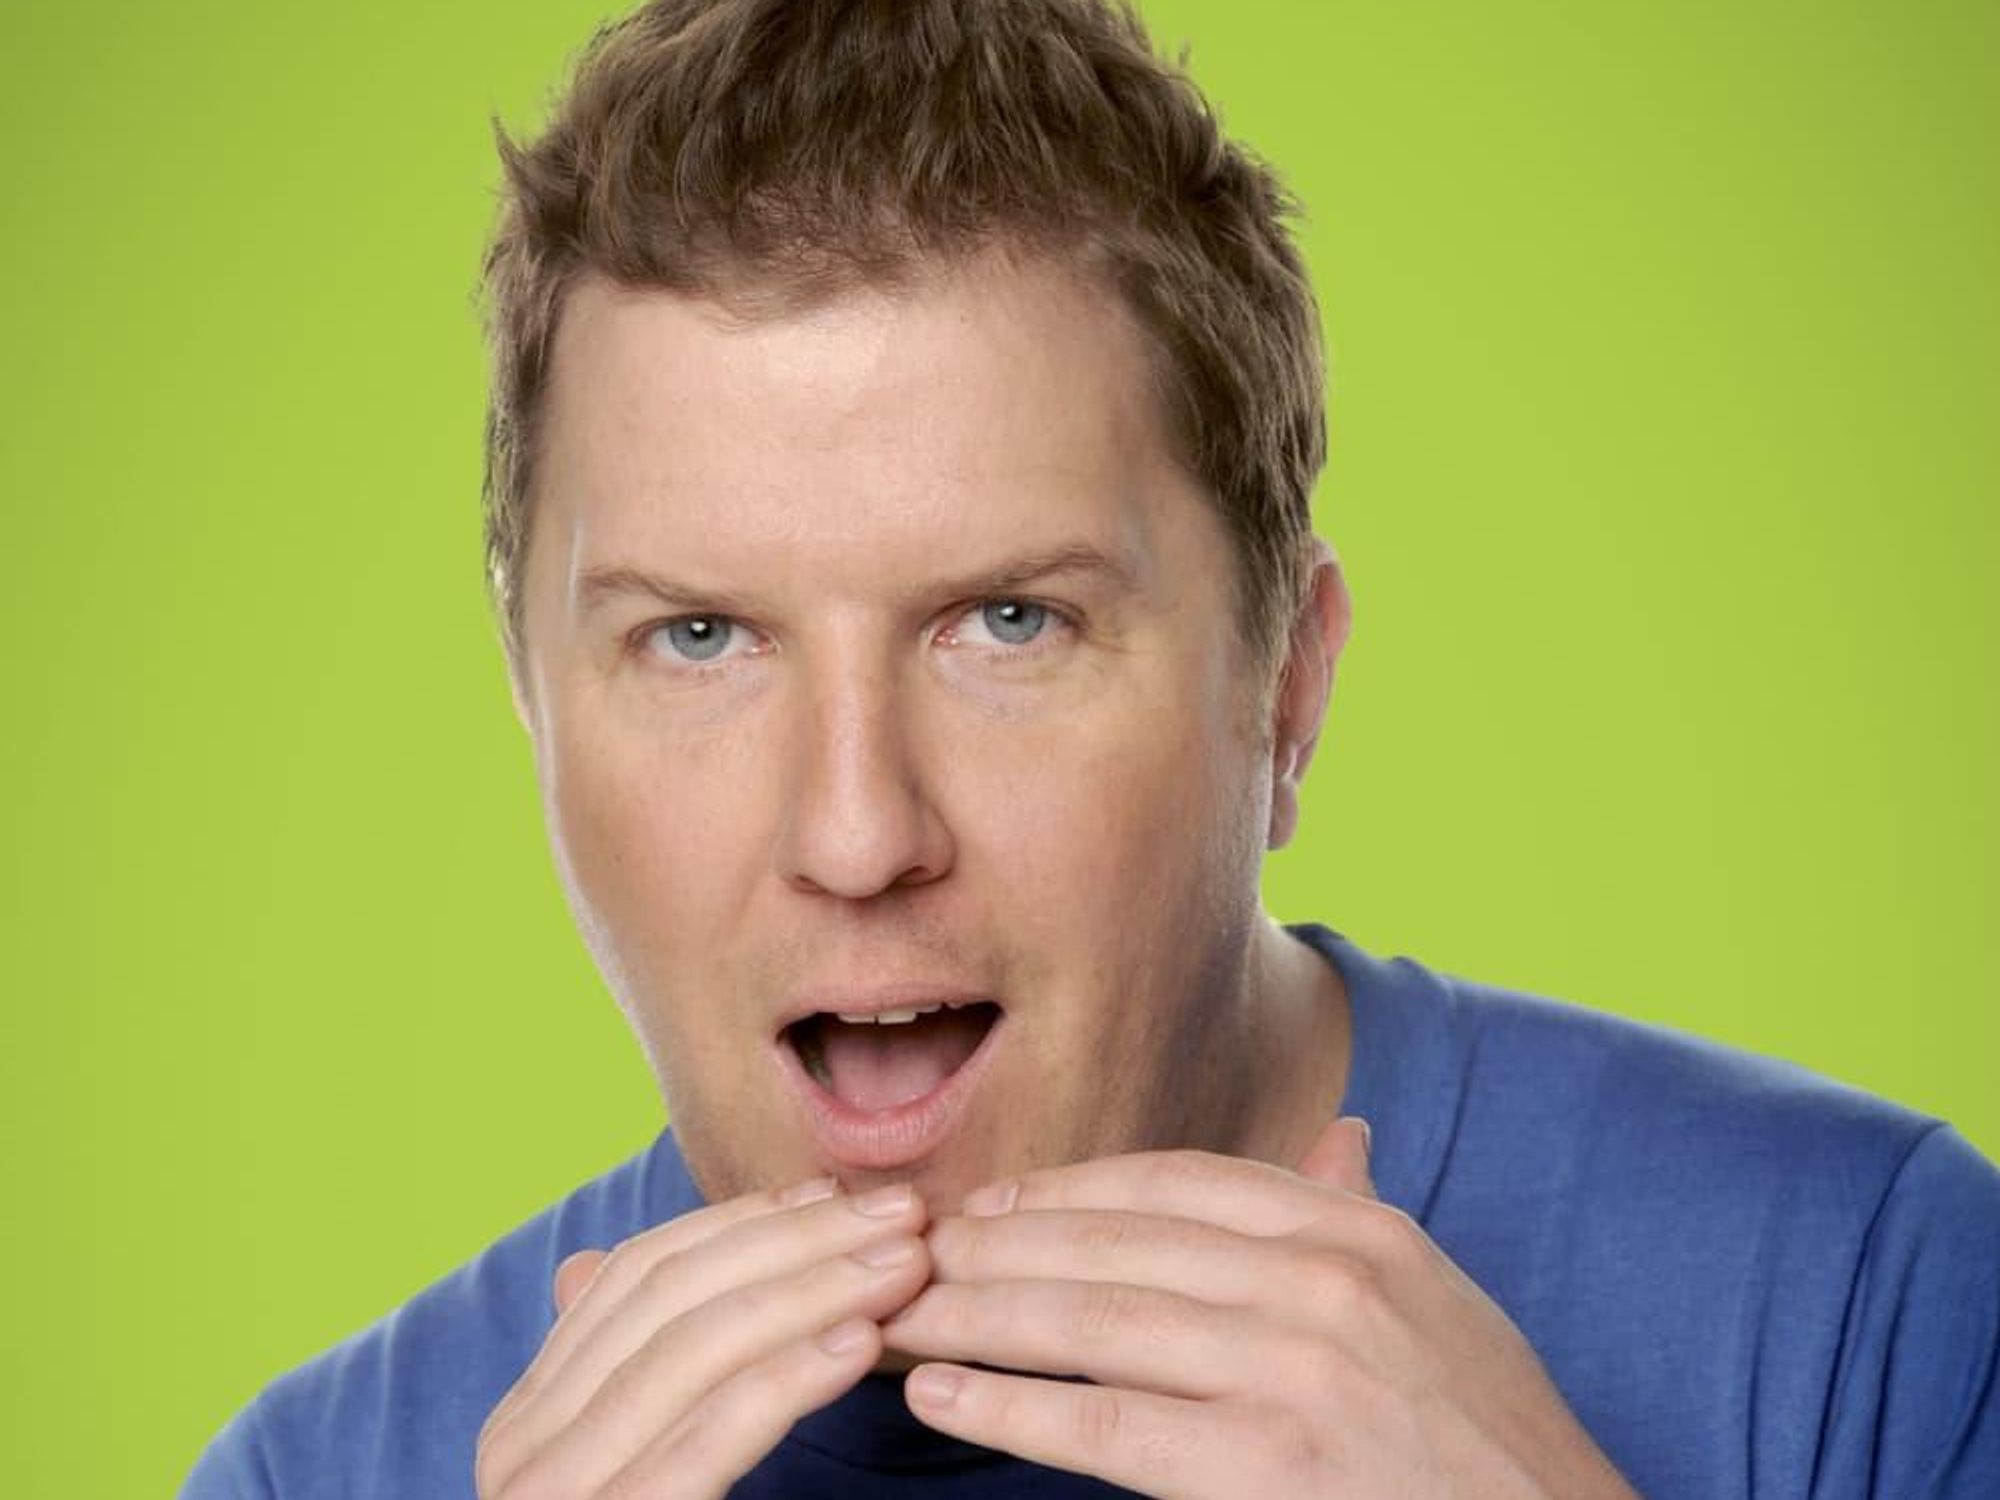 Comedian Nick Swardson will make jokes from his face on tour coming to